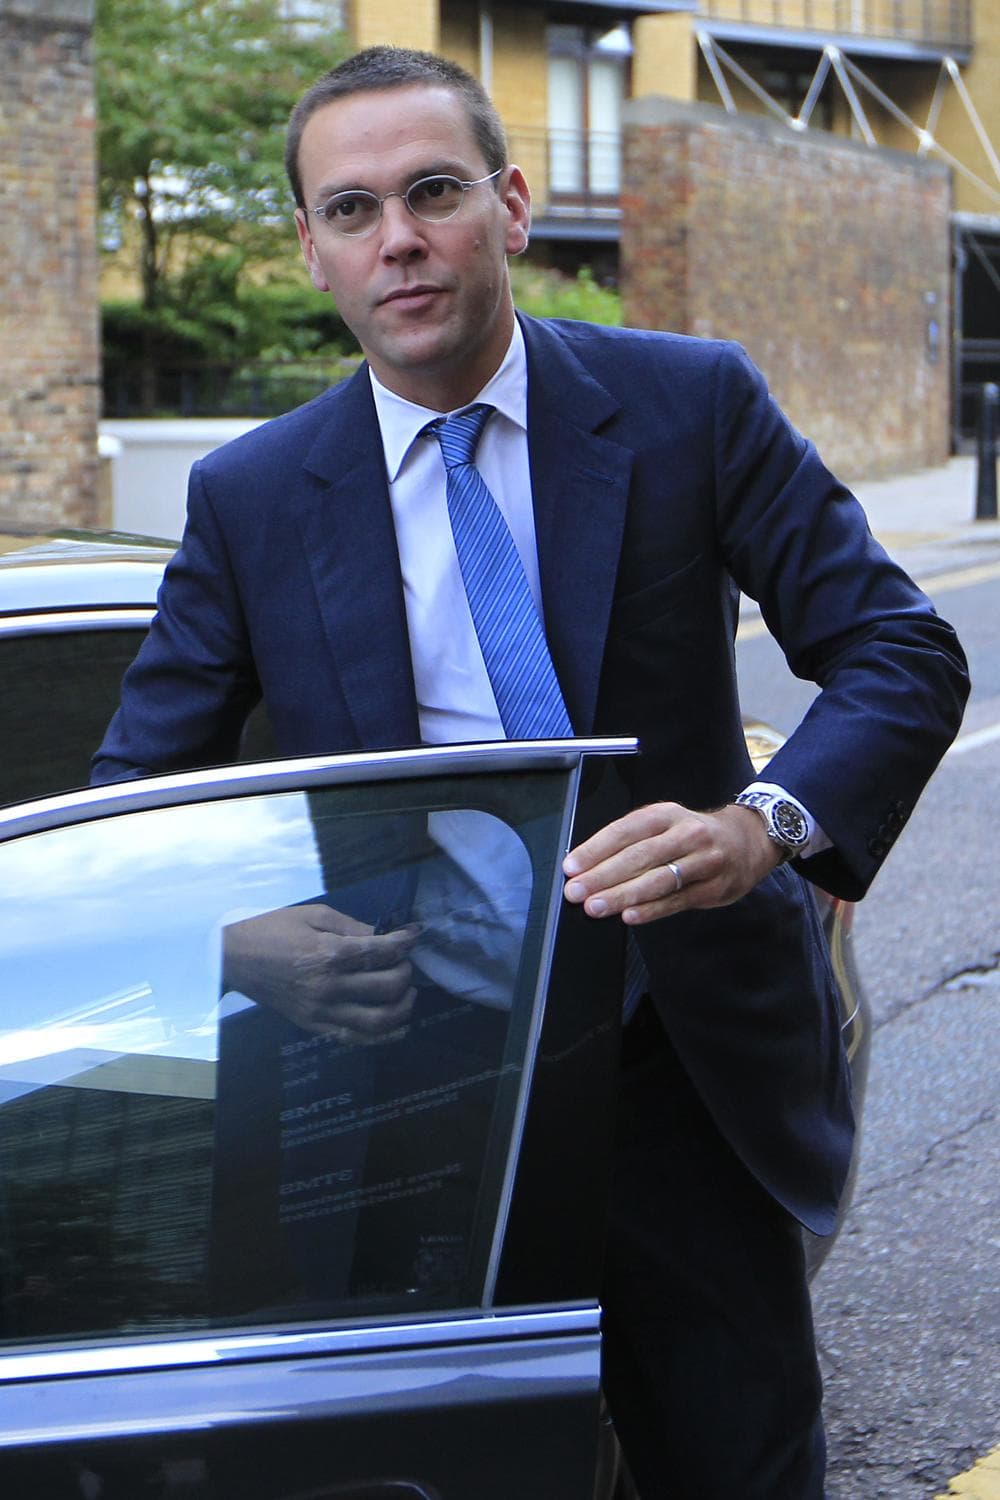 Chief executive of News Corporation Europe and Asia, James Murdoch arrives at News International headquarters in London in July. (AP)